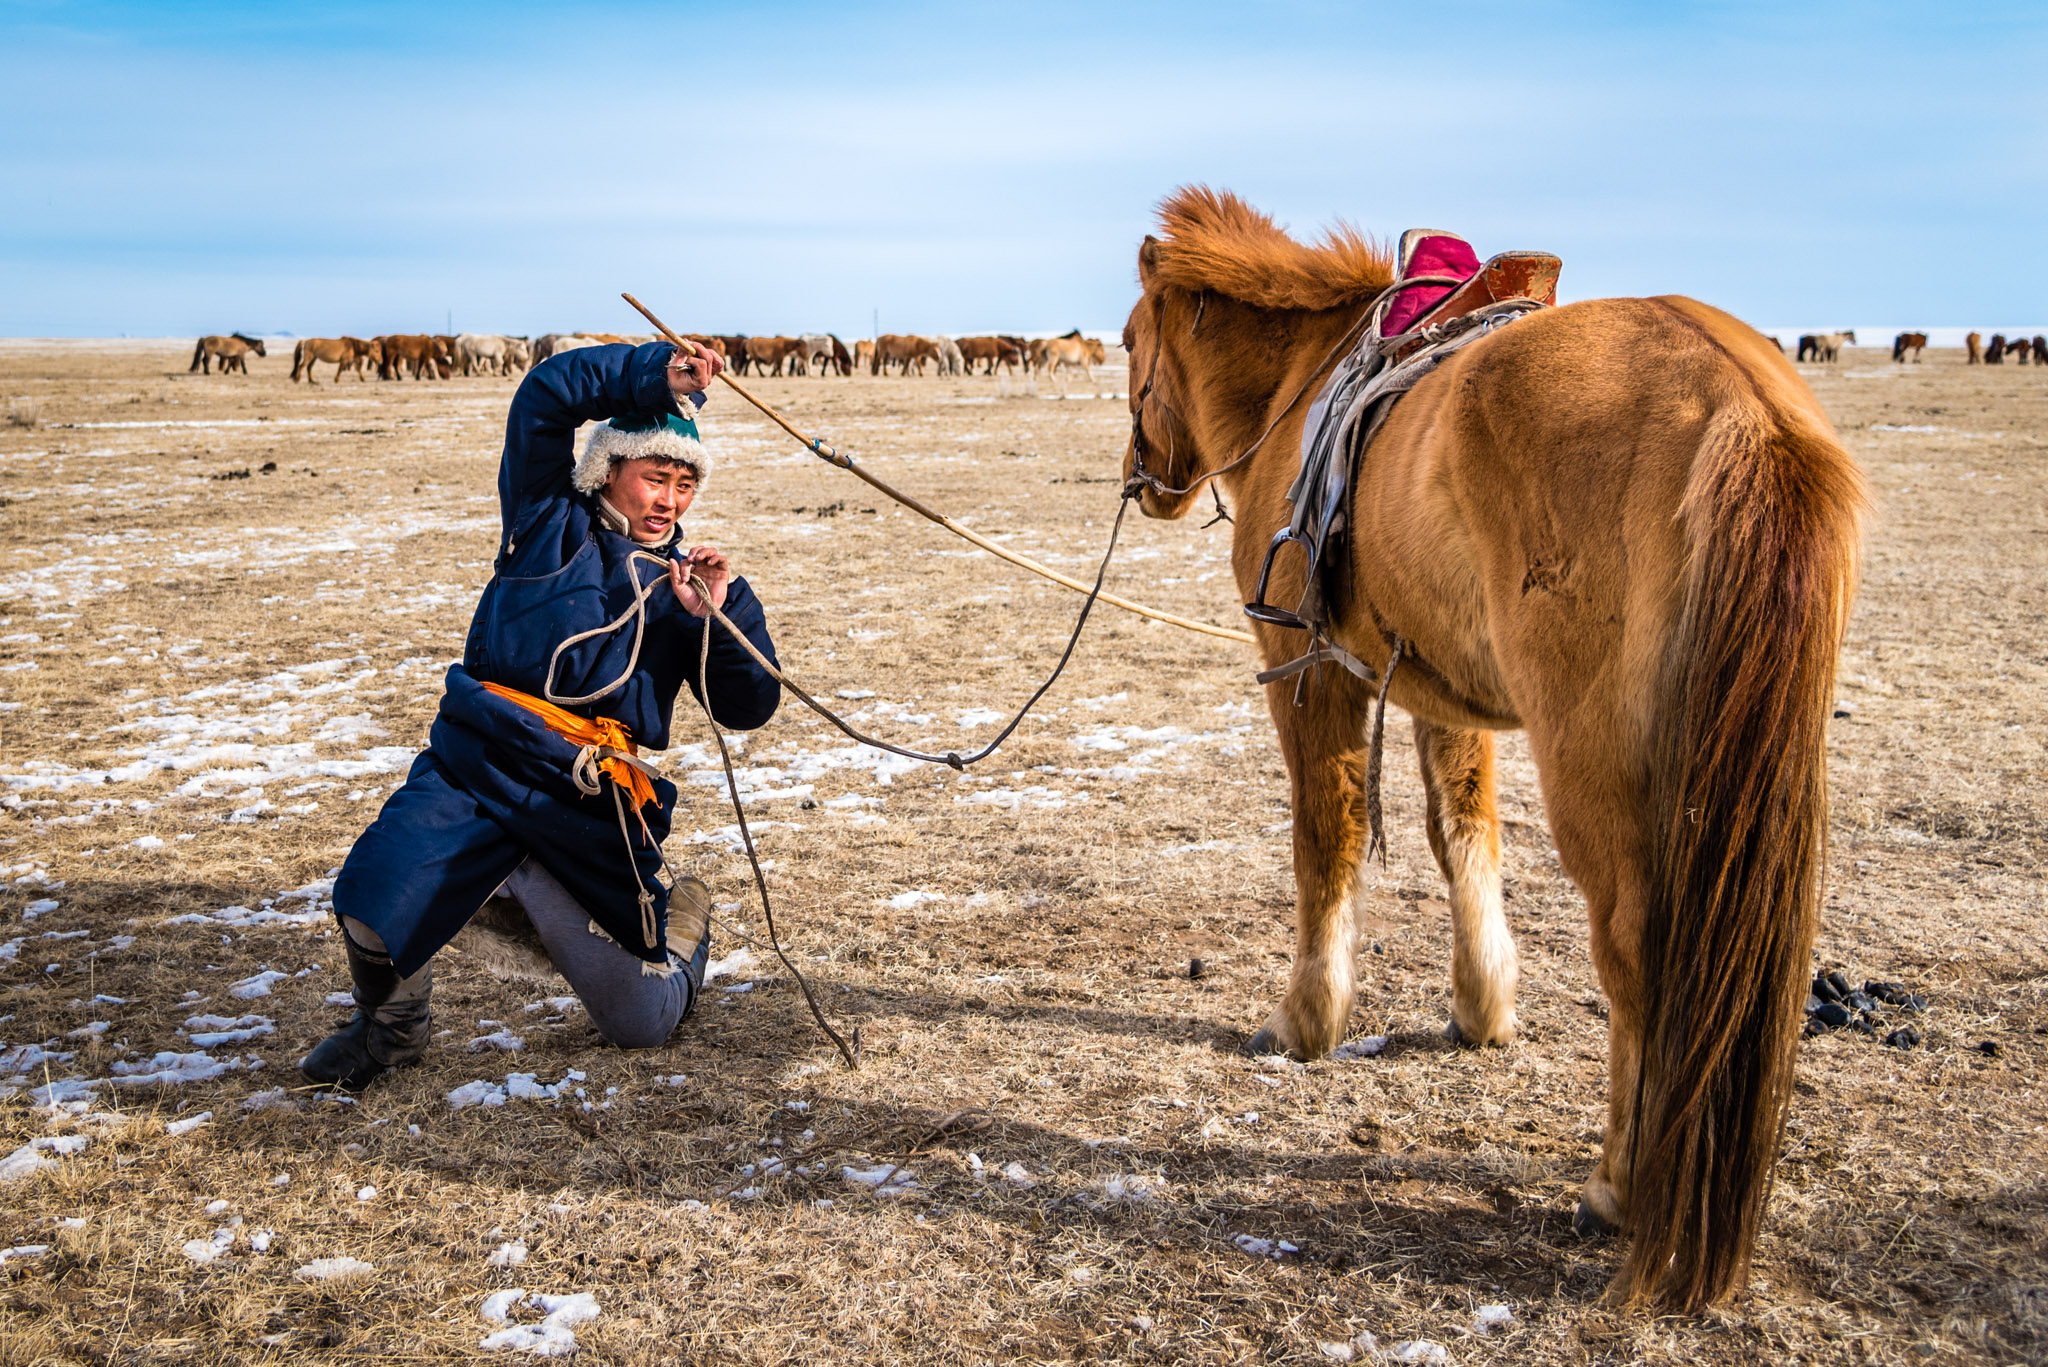 Traditions in Mongolia are very much alive. Breeding and taming horses are among them.